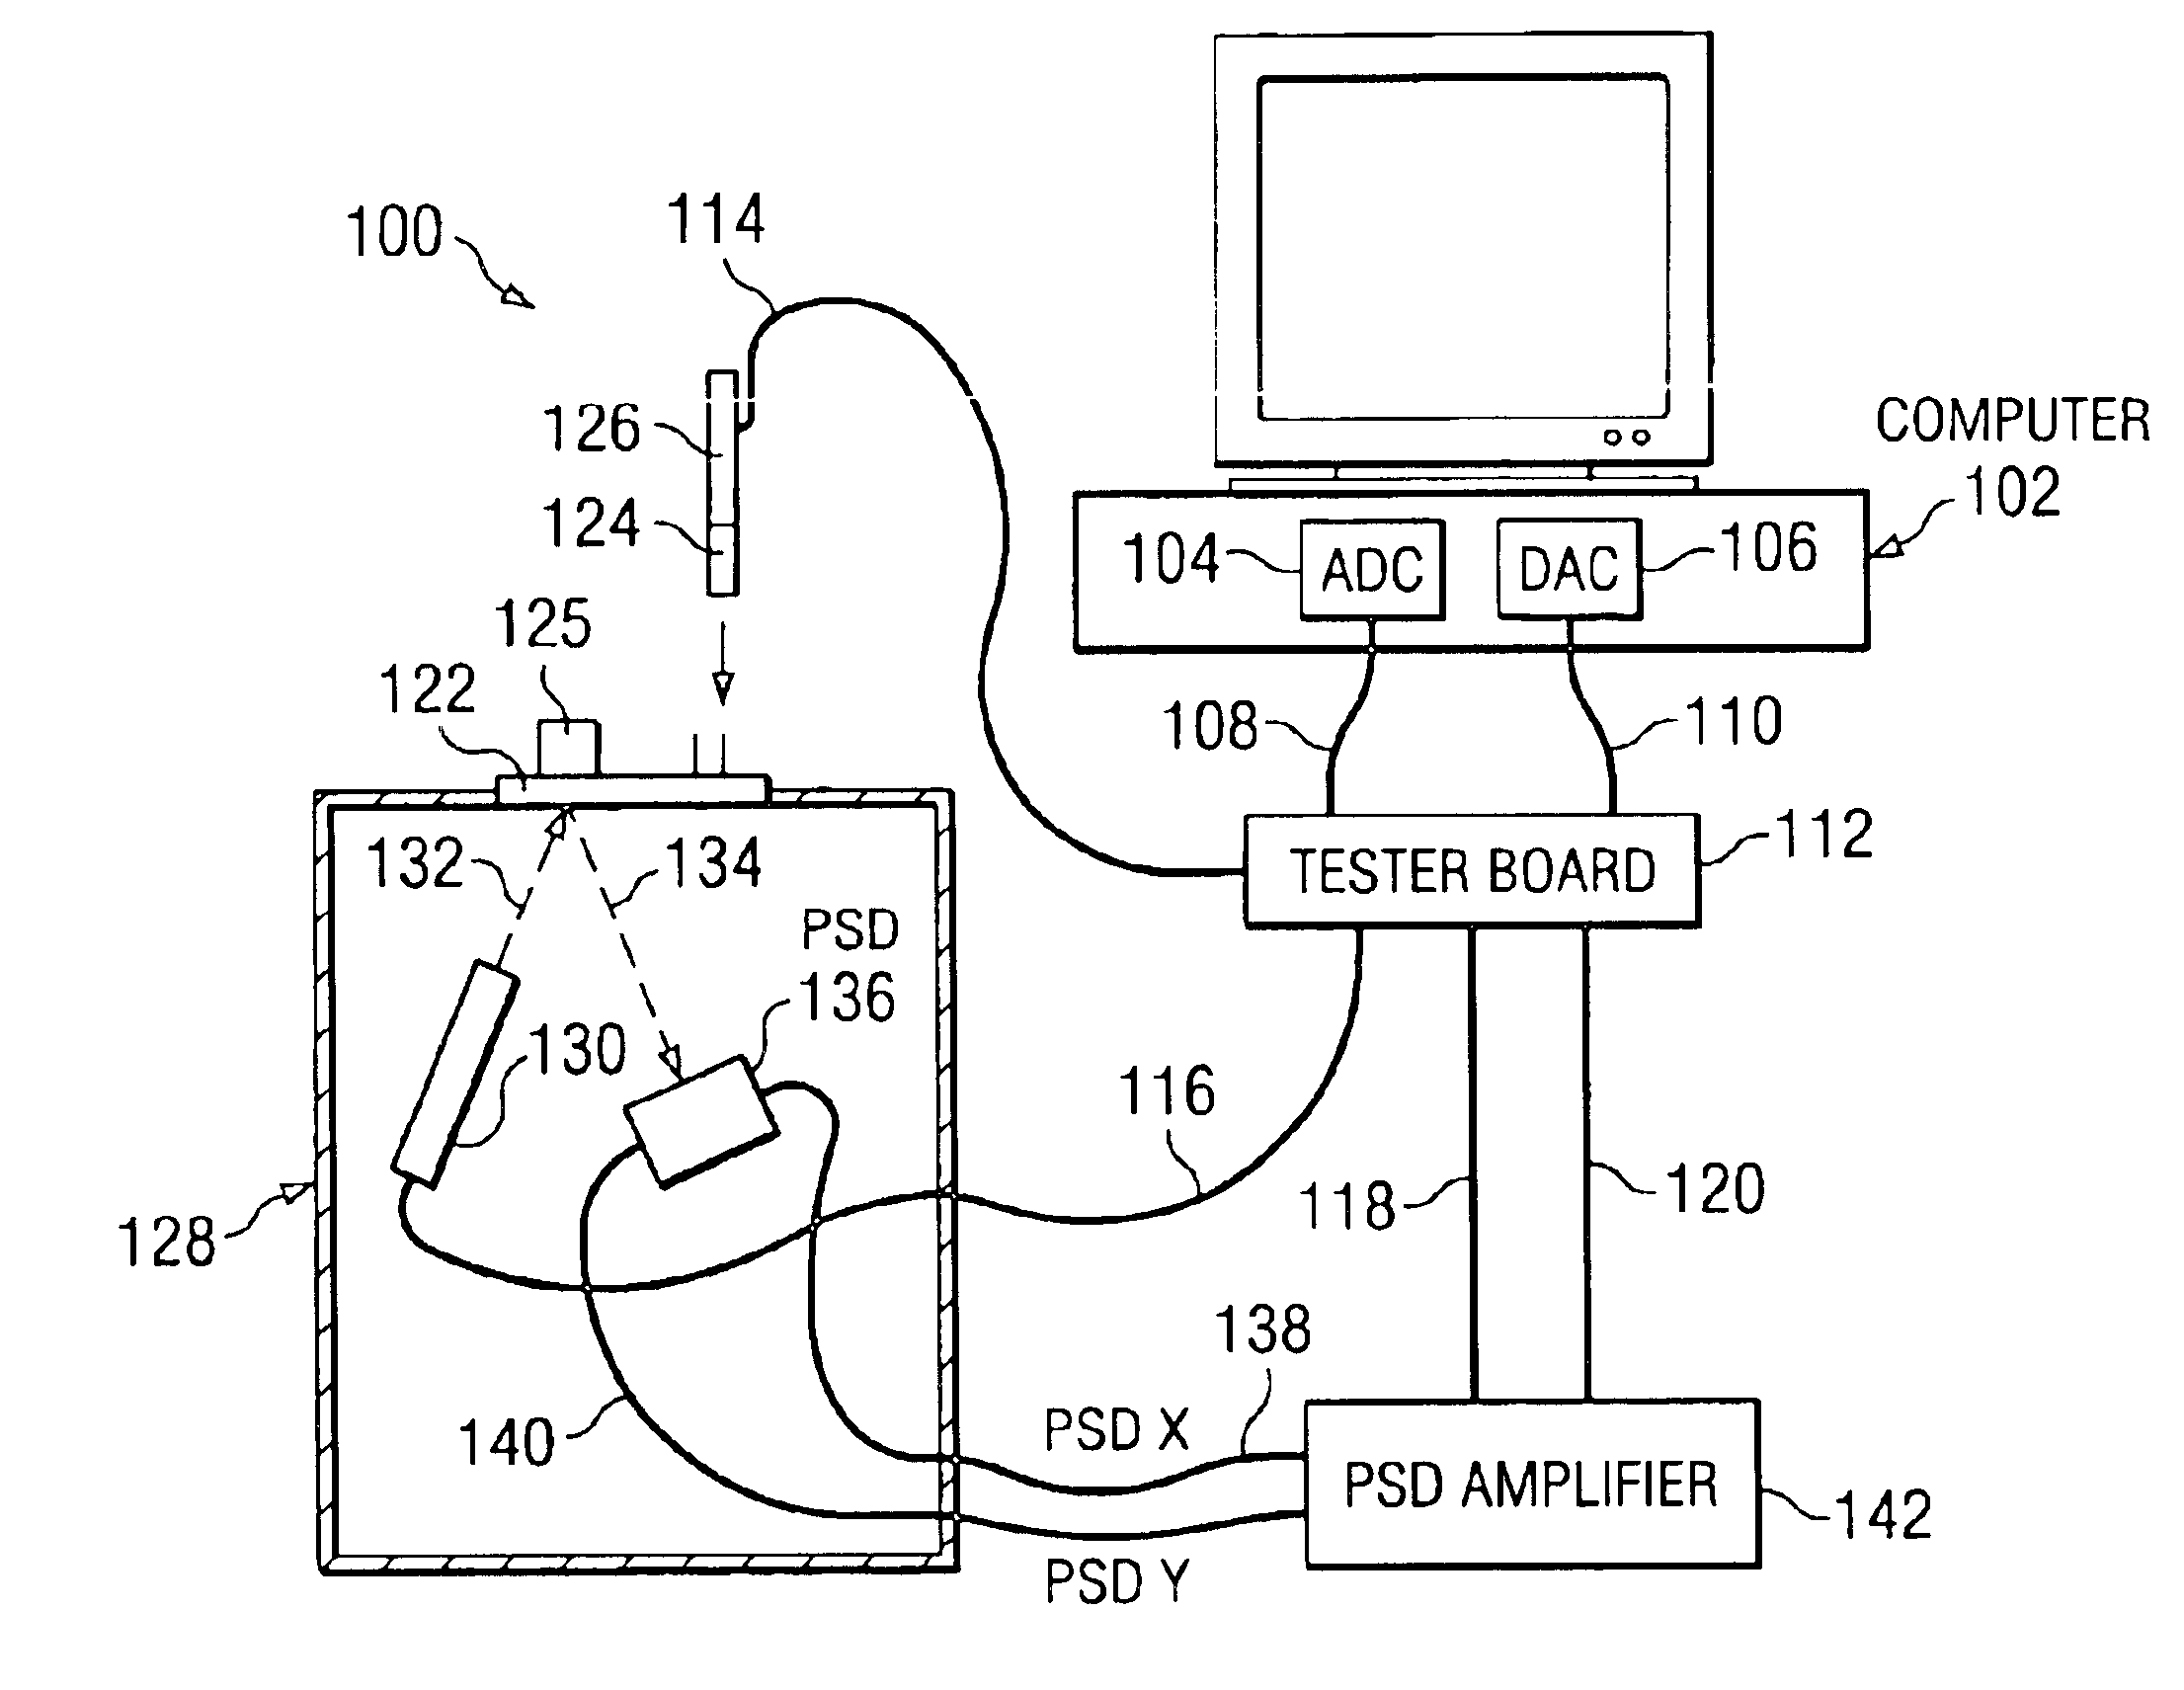 Automatic test system for an analog micromirror device